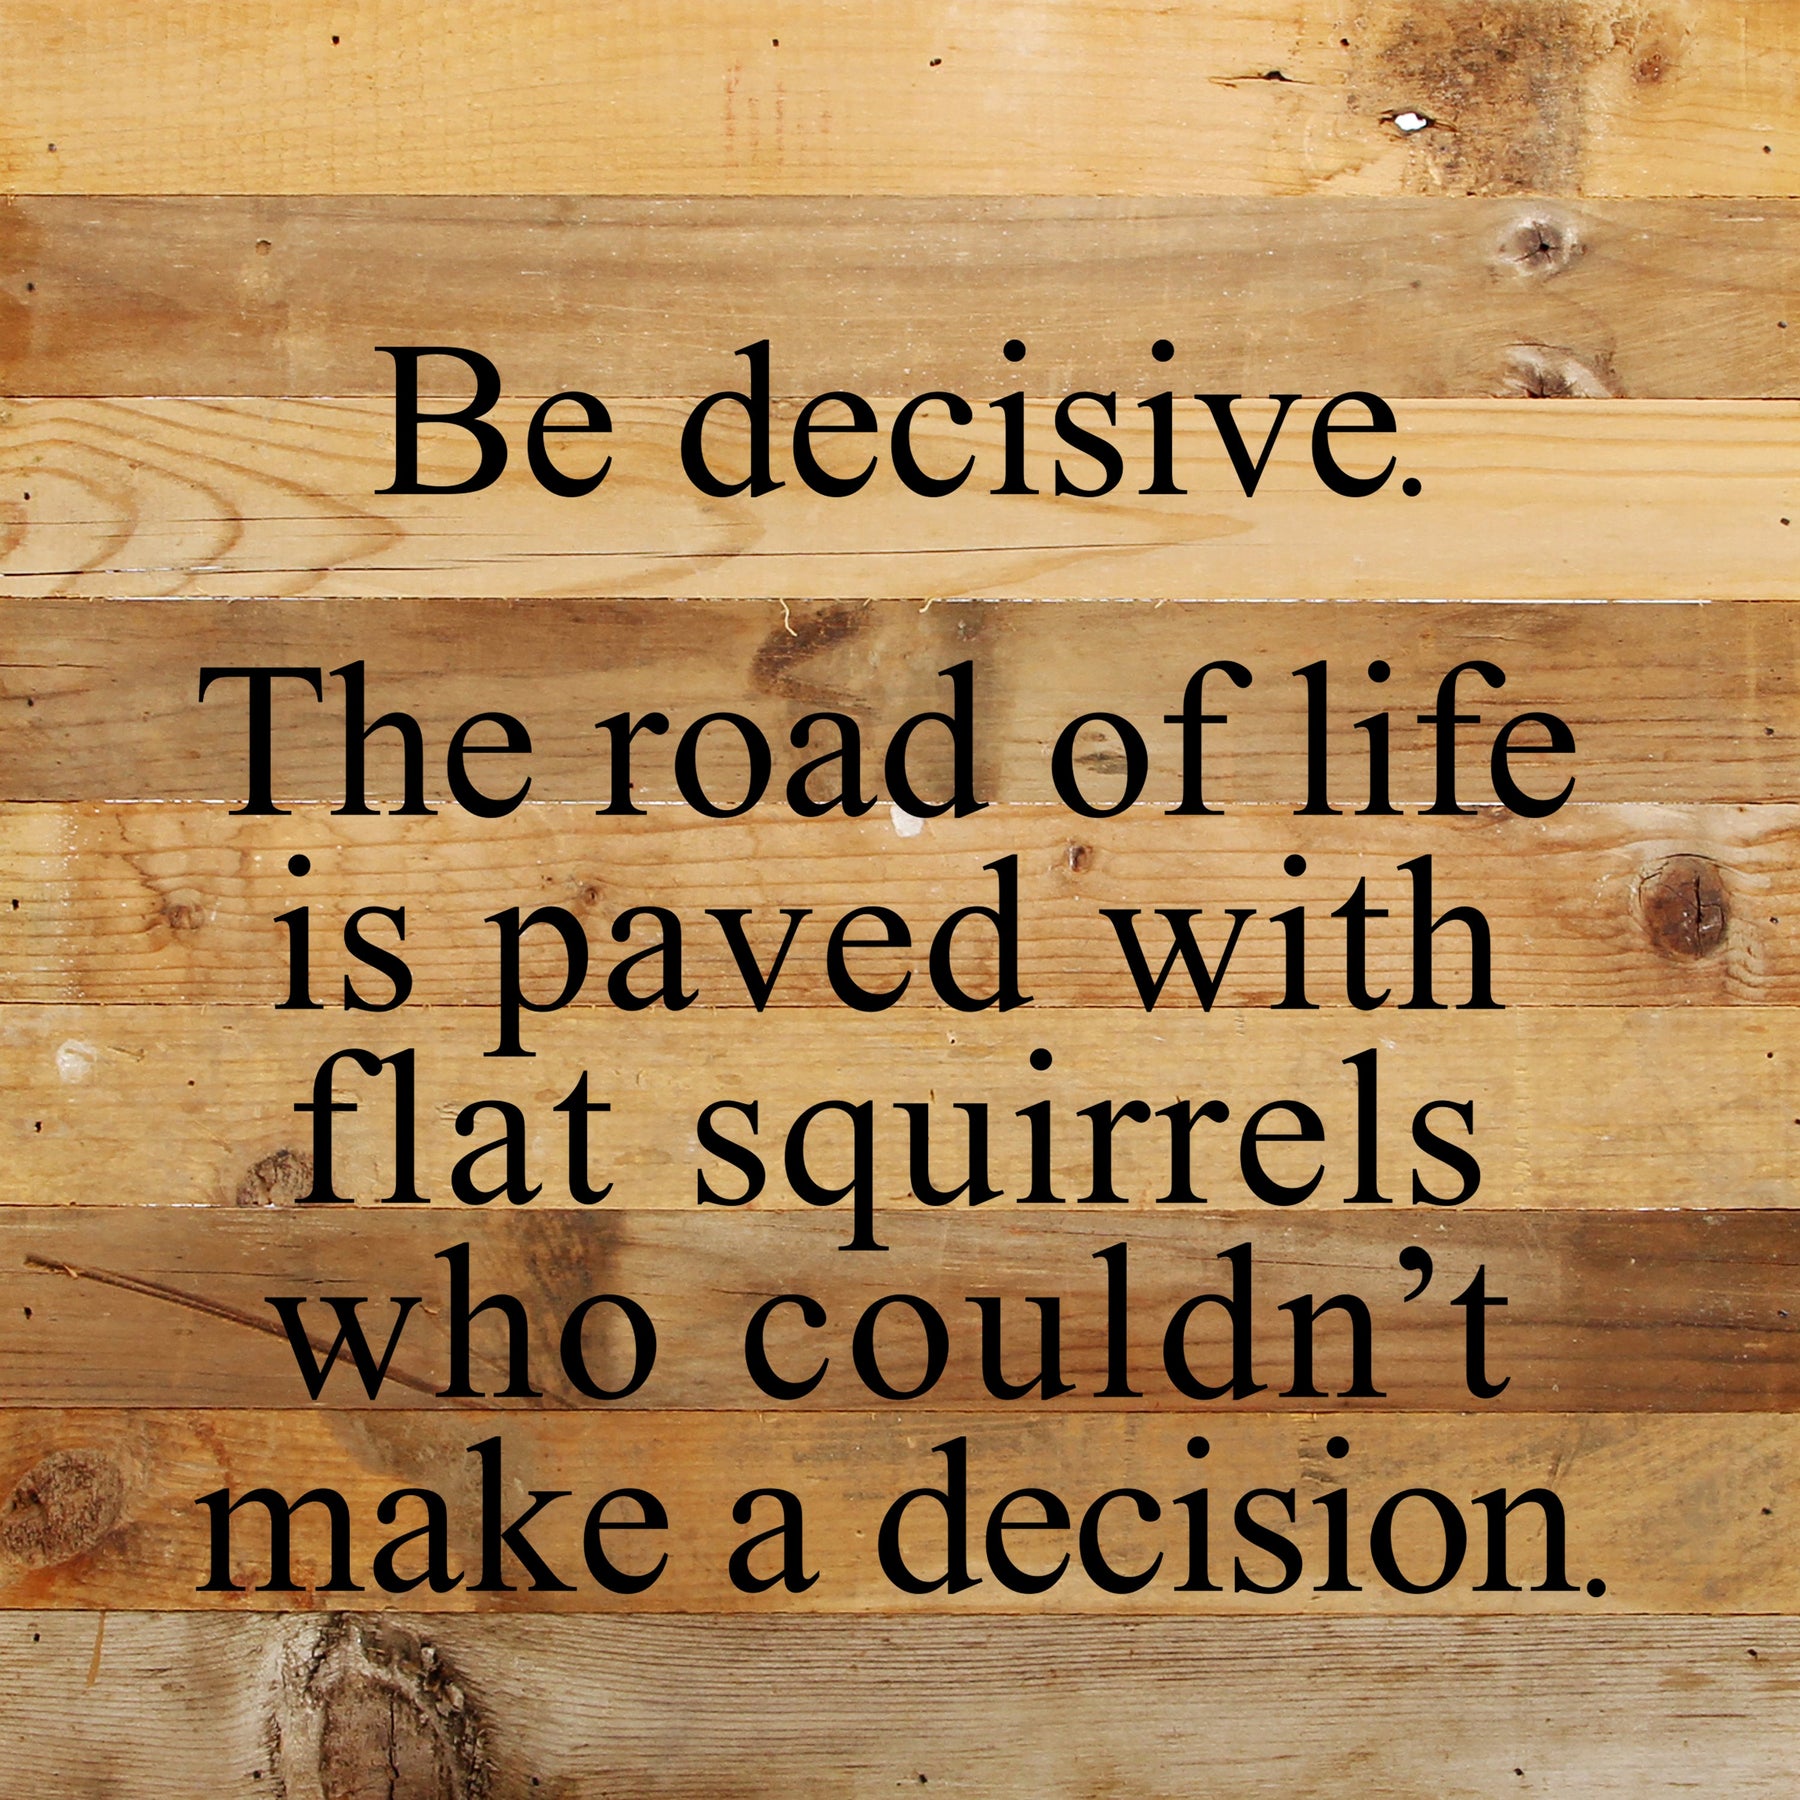 Be decisive. The road of life is paved with flat squirrels who couldn't make a decision. / 10"x10" Reclaimed Wood Sign